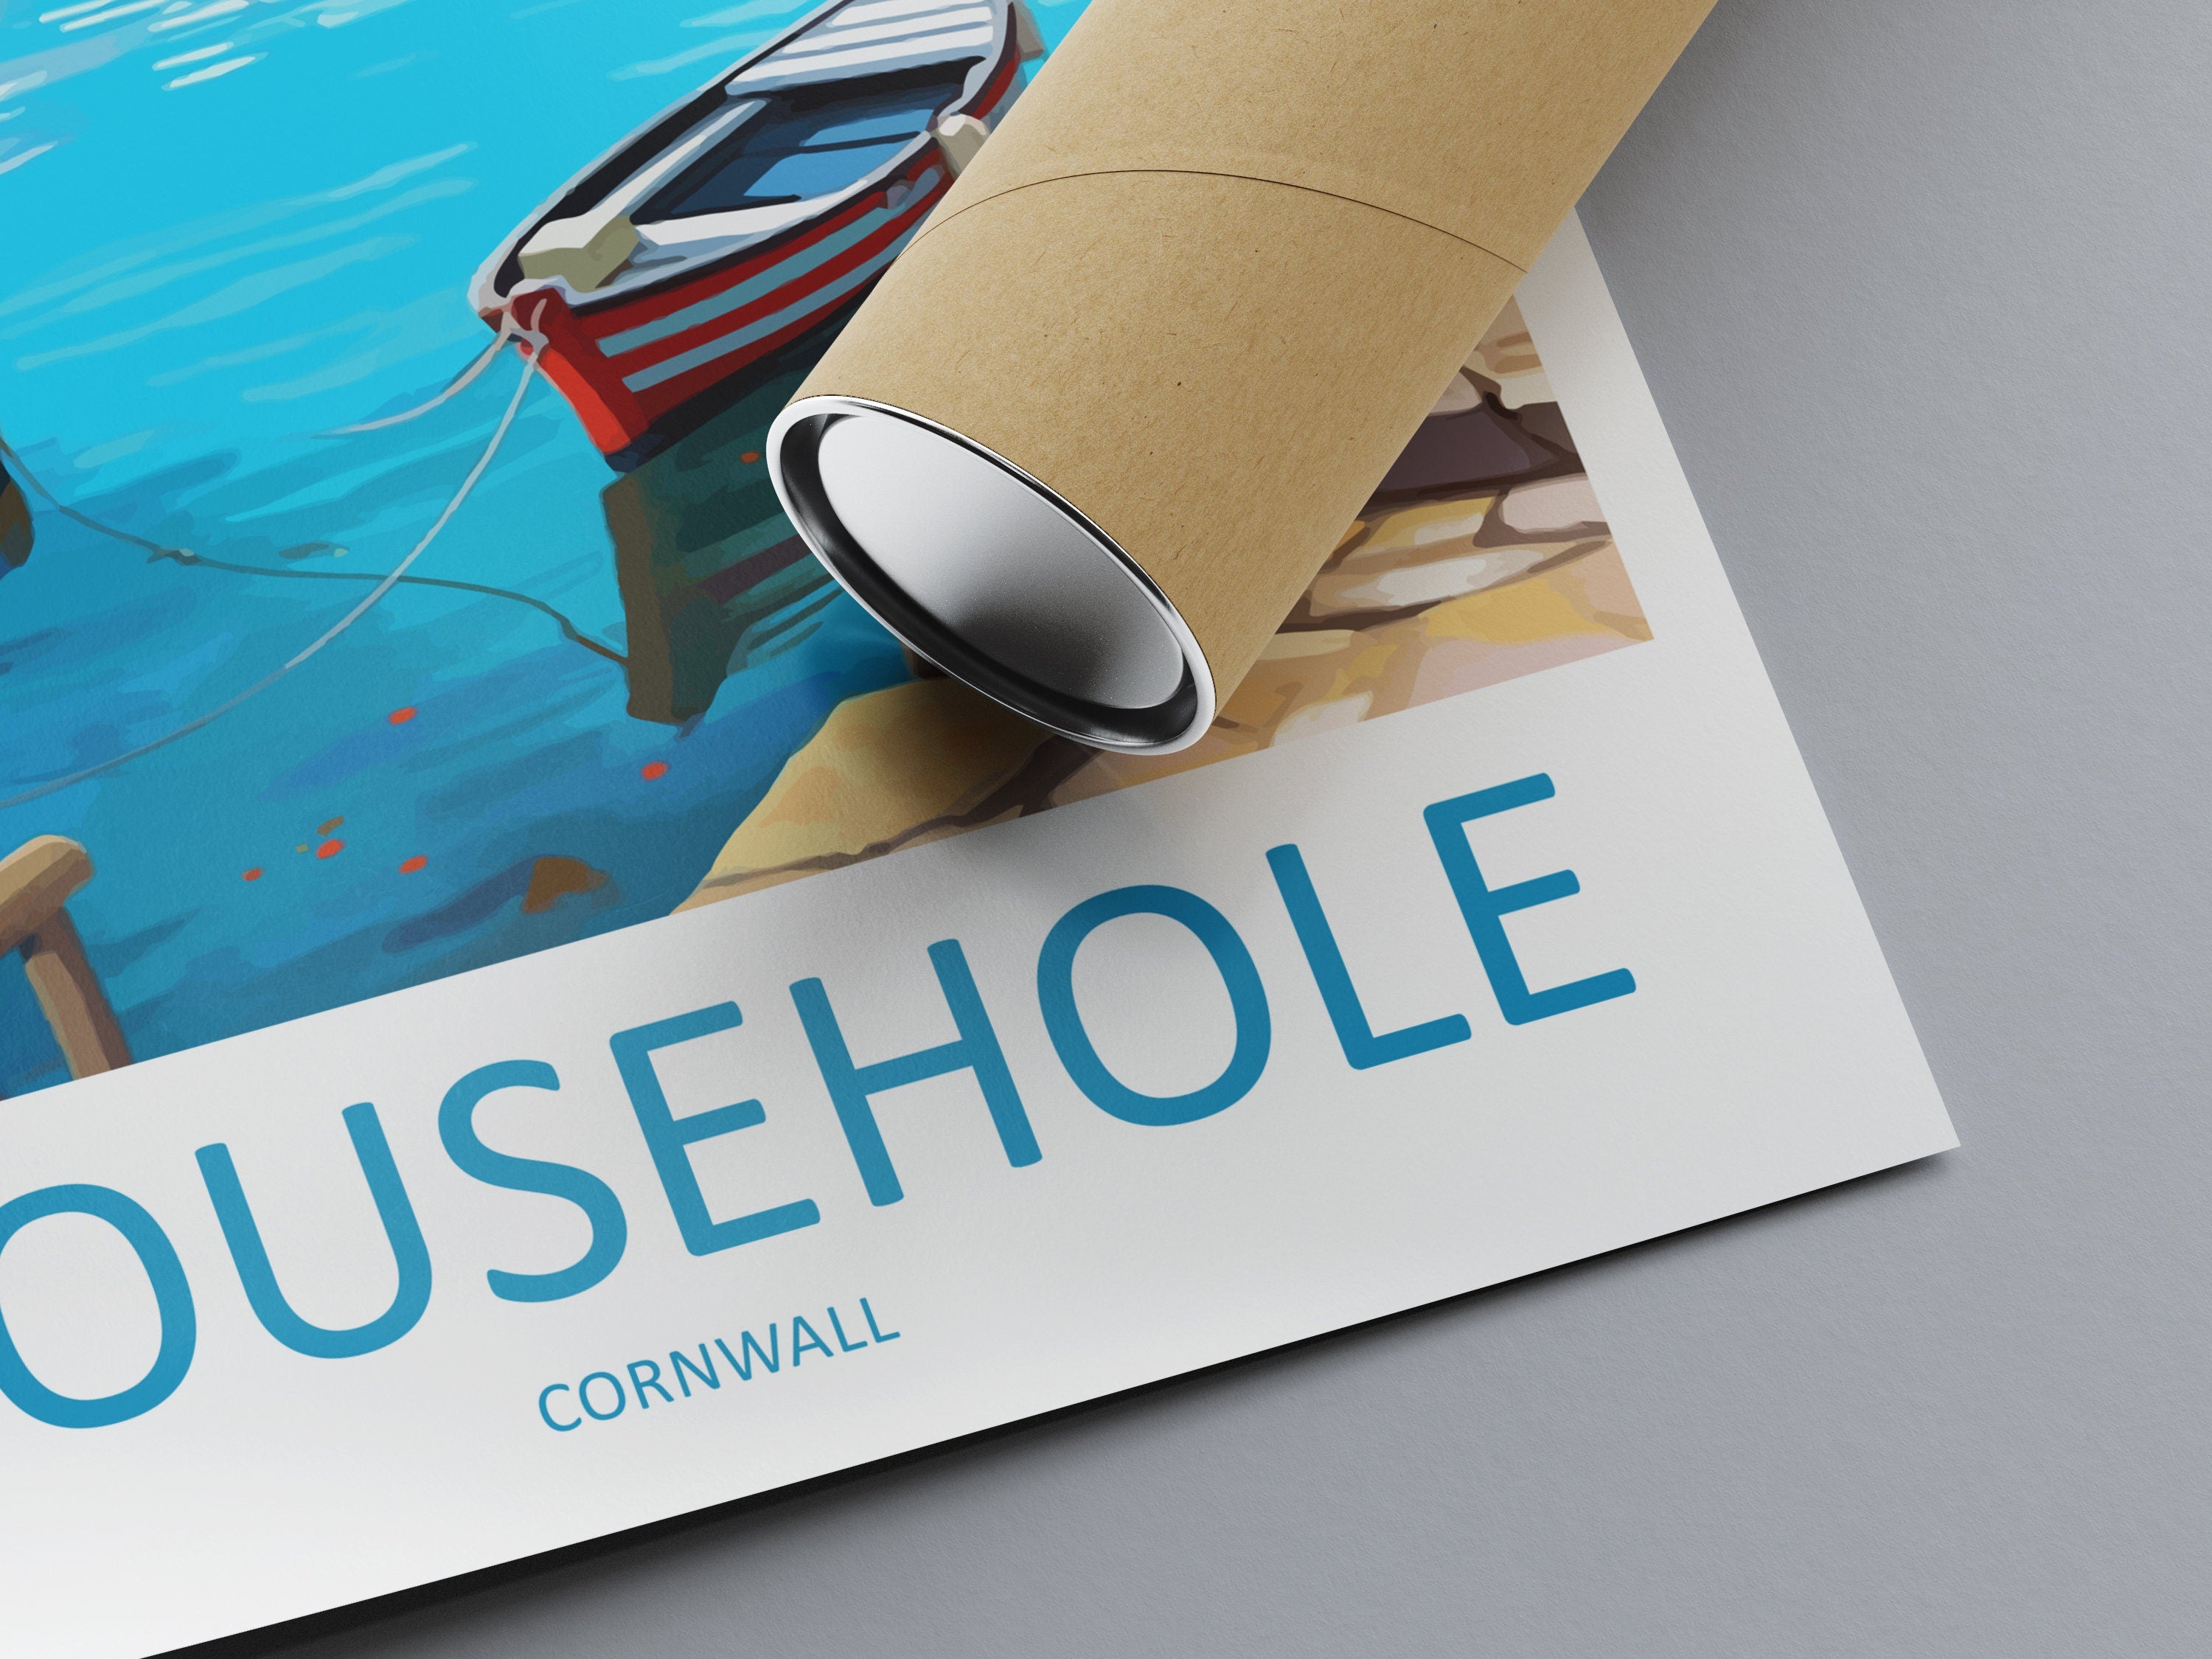 Mousehole Travel Print Wall Art Mousehole Wall Hanging Home Décor Mousehole Gift Art Lovers England Art Lover Gift Mousehole Poster